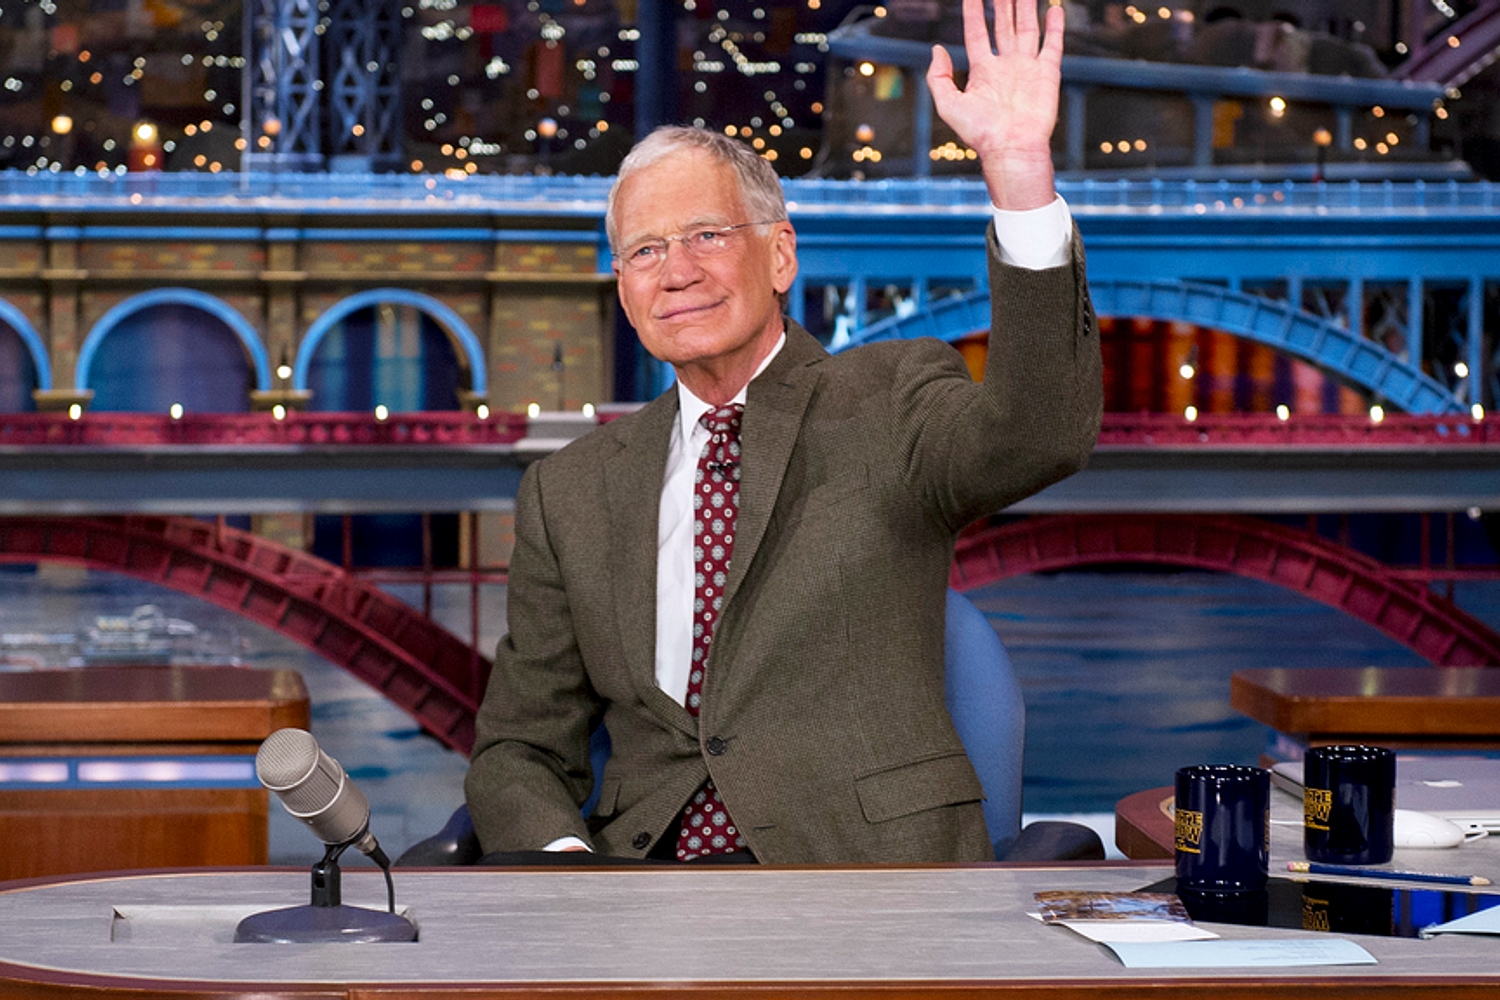 Laters, Letters: David Letterman’s most iconic Late Show performances